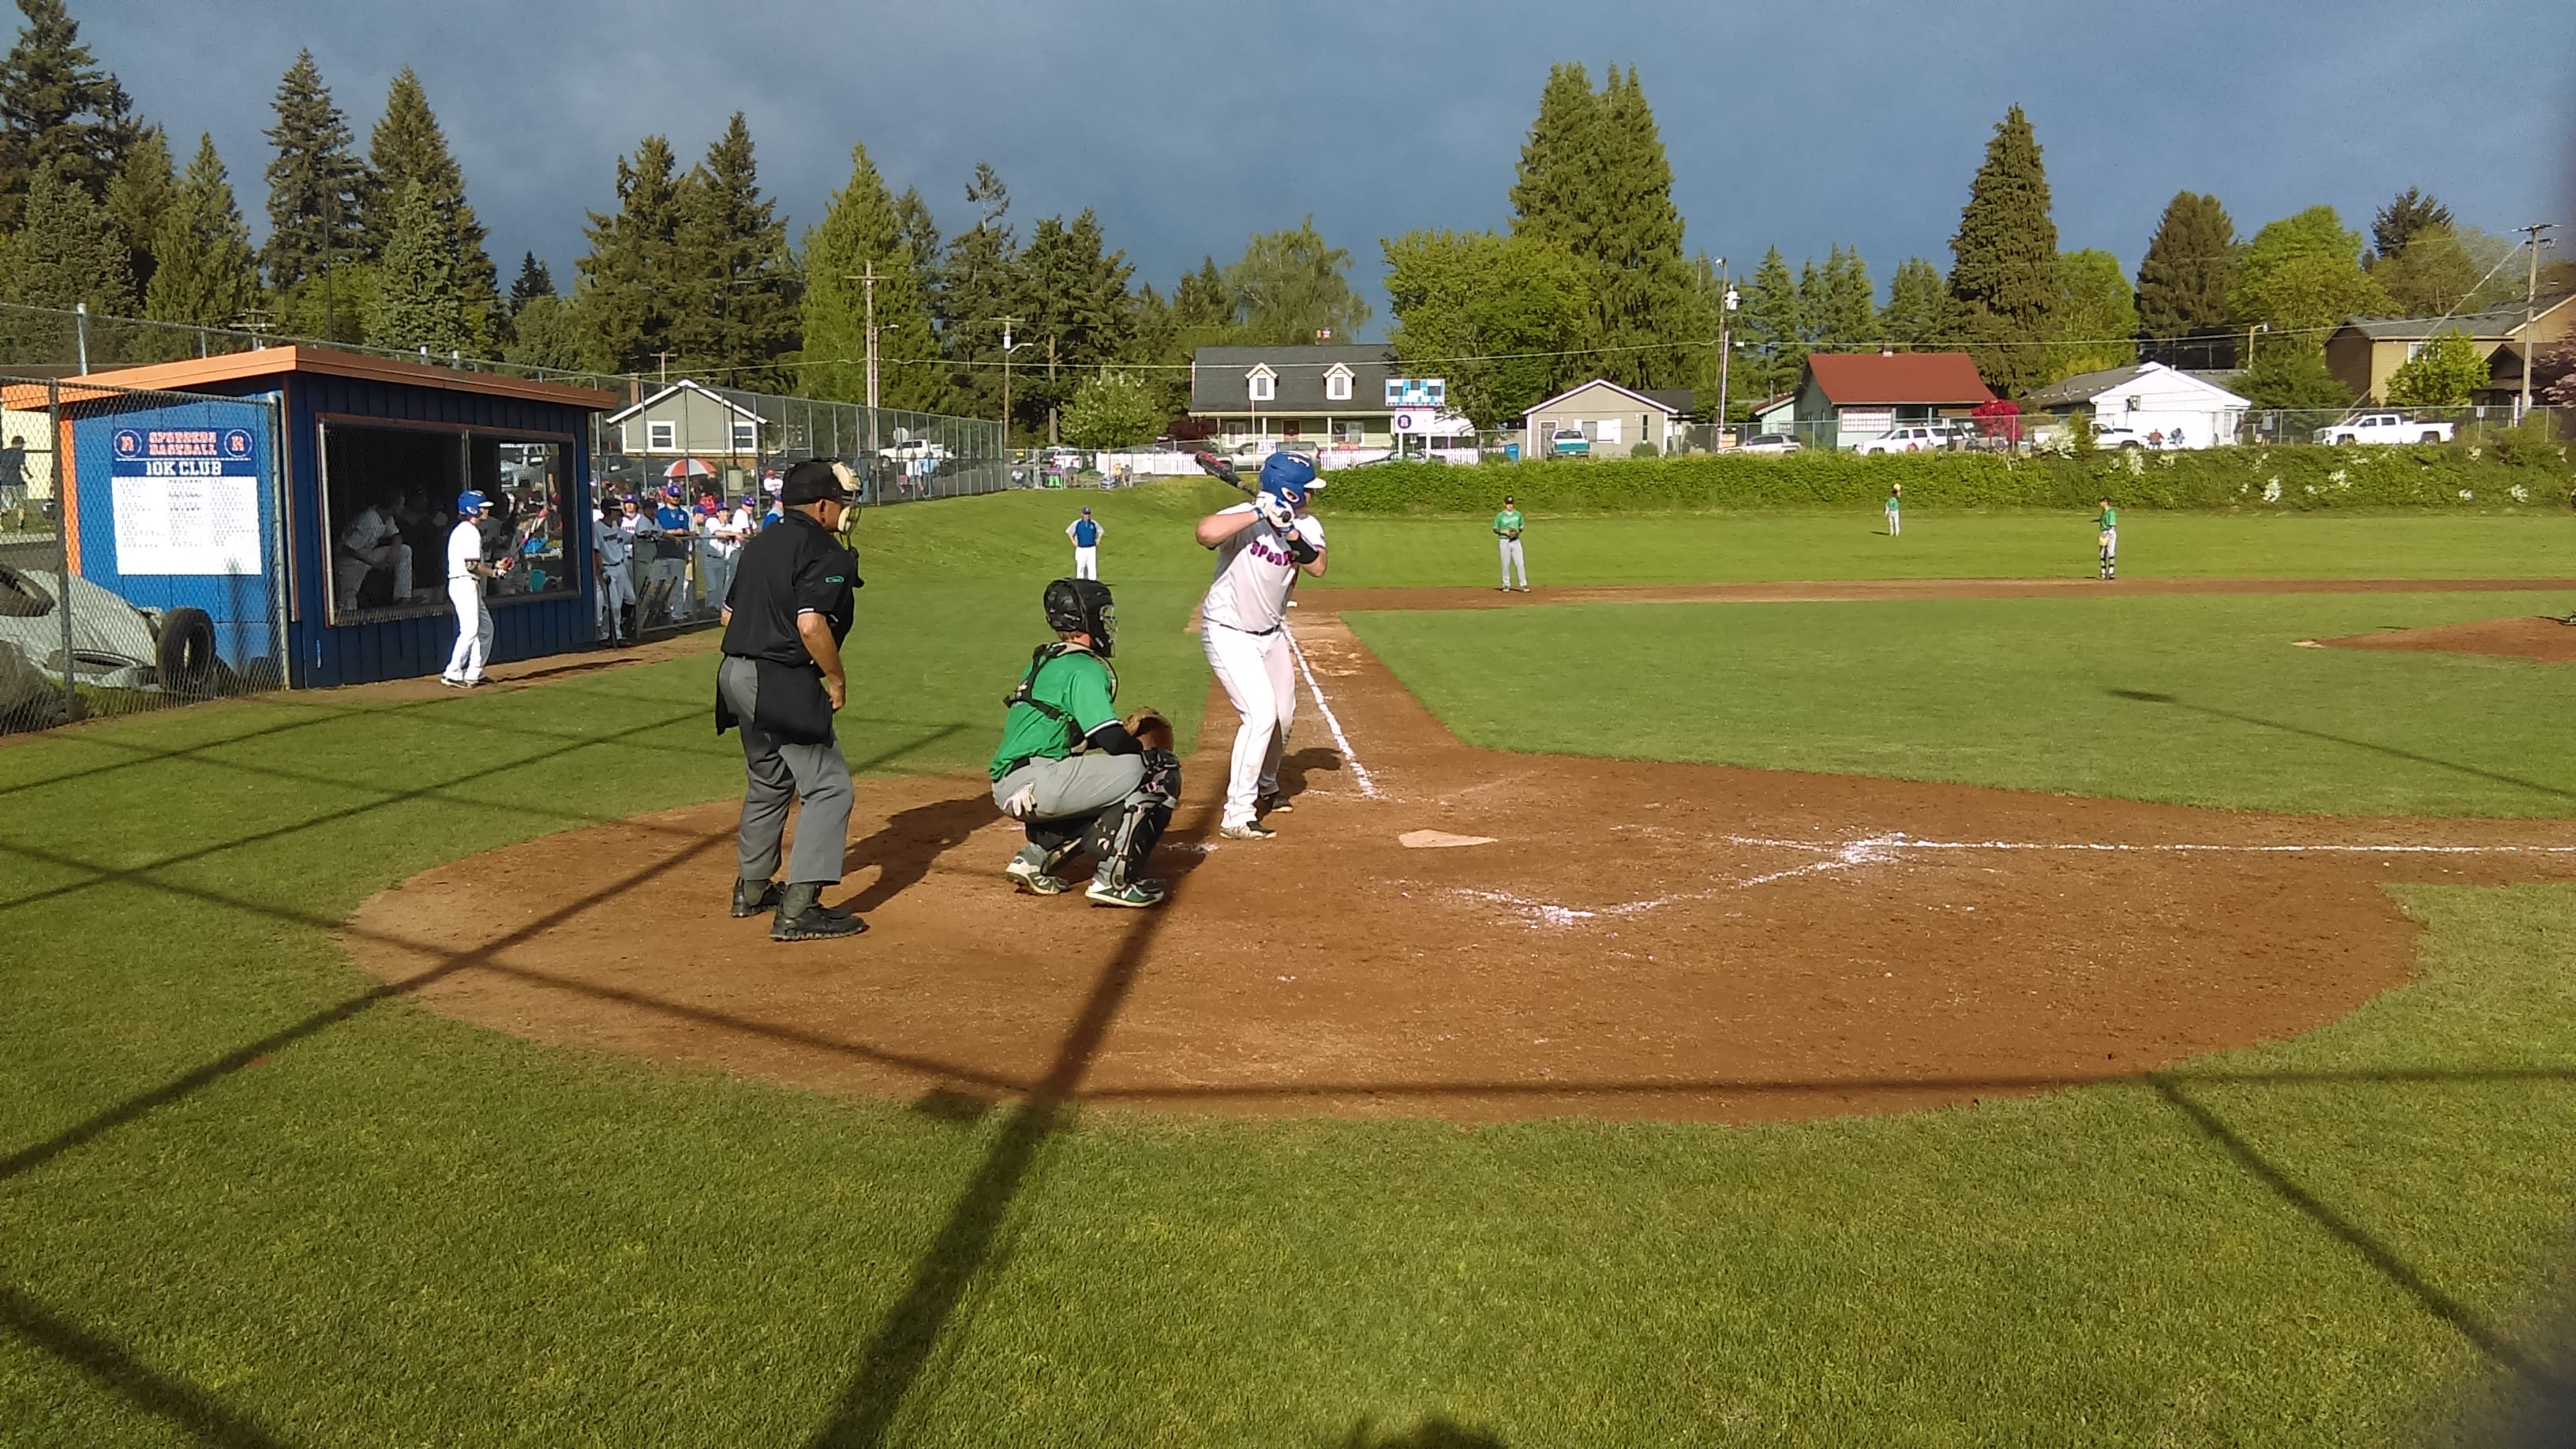 Ridgefield's Brock Harrison stands in the box, awaiting the pitch against Tumwater.